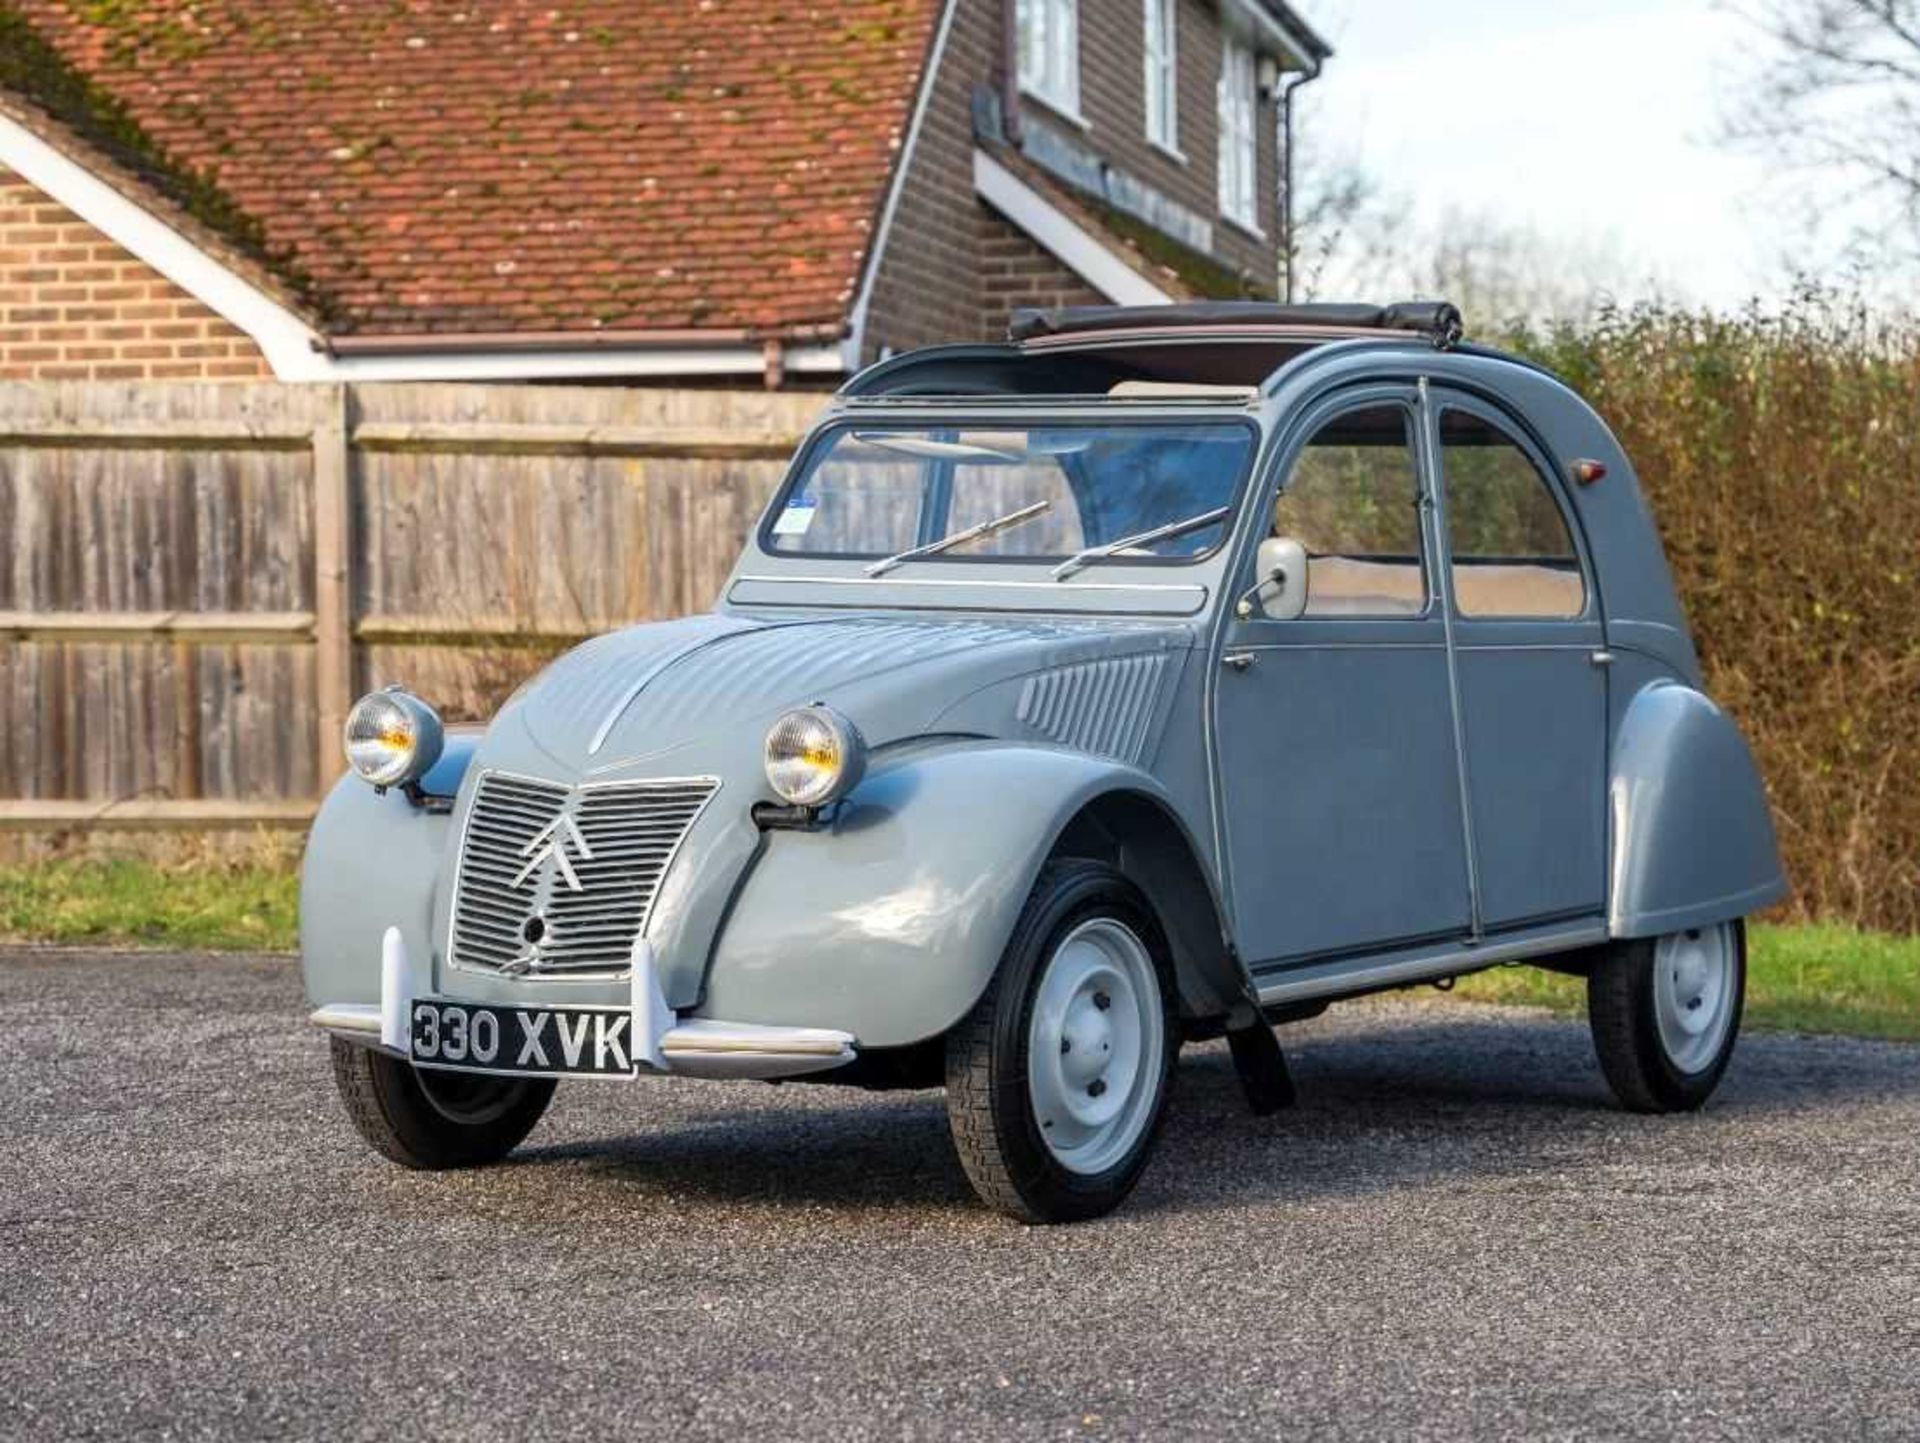 1958 Citroën 2CV AZL A rare, early example, with sought-after 'ripple bonnet' - Image 2 of 77